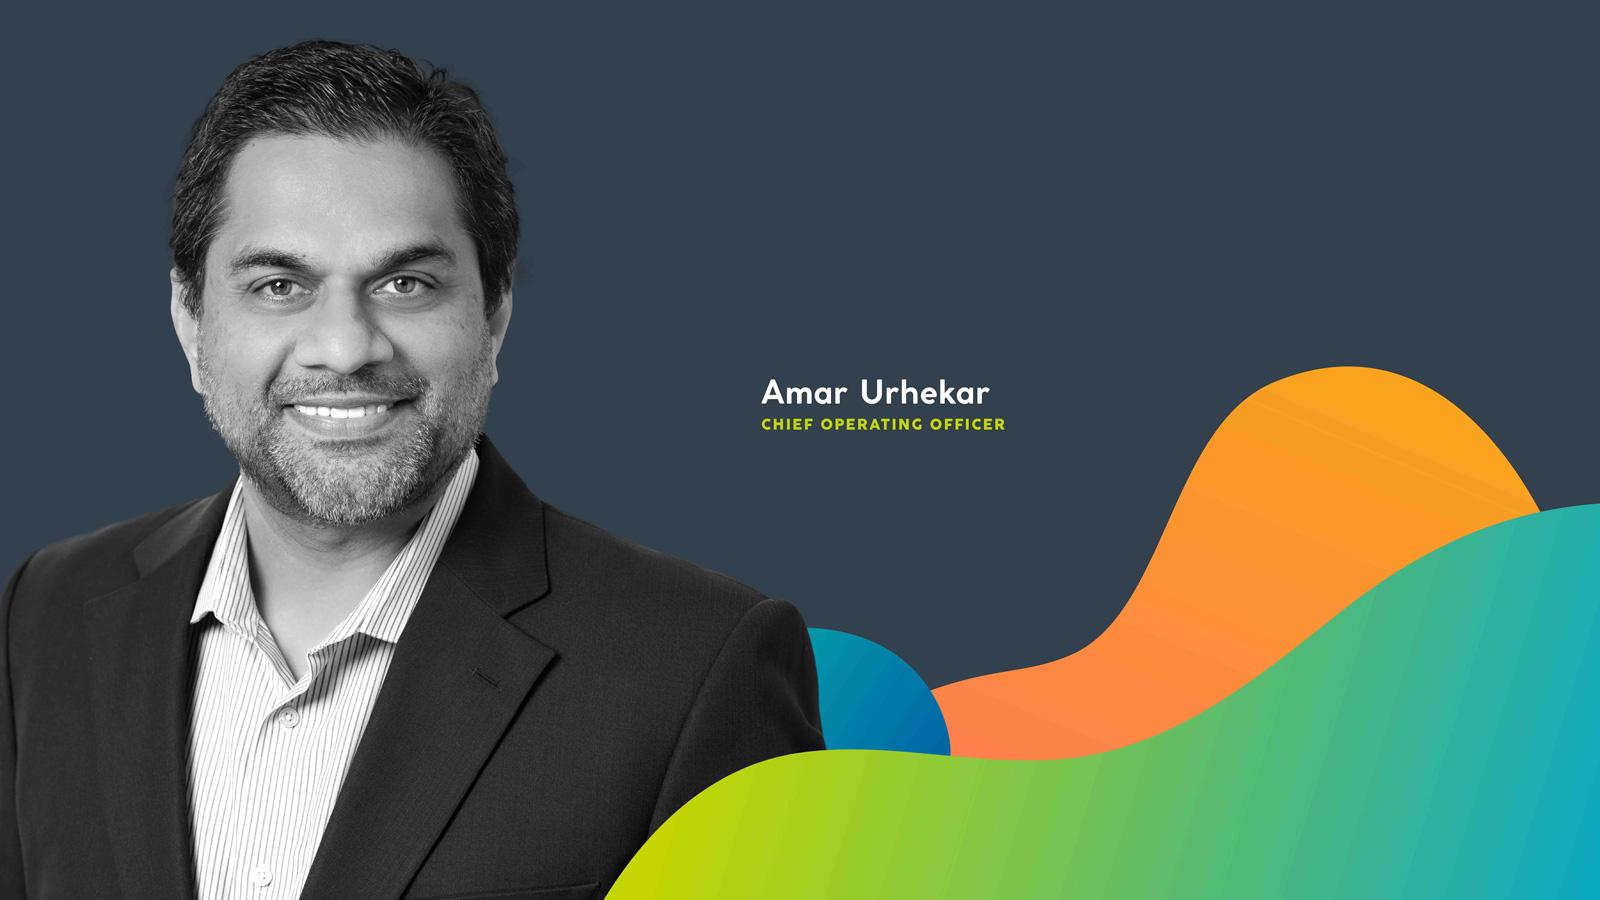 Amar Urhekar joins FH as Chief Operating Officer